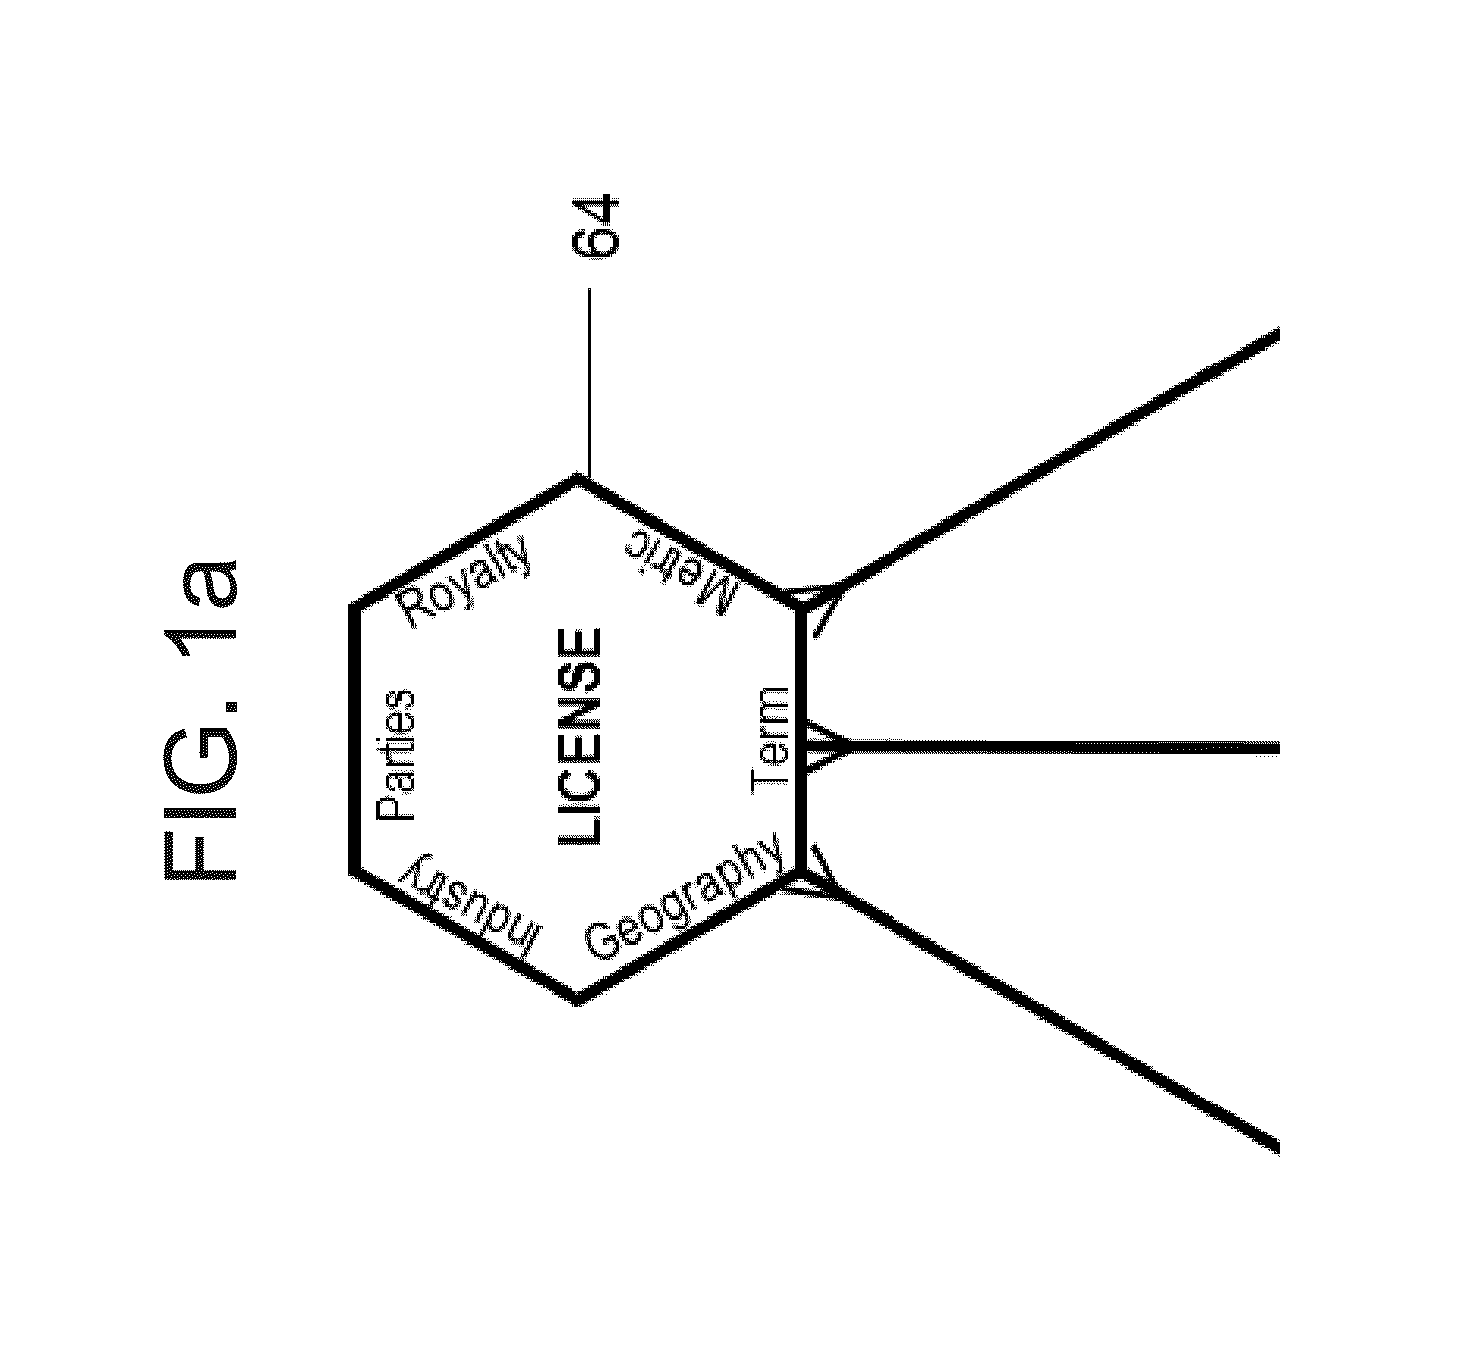 System and method for management of intangible assets